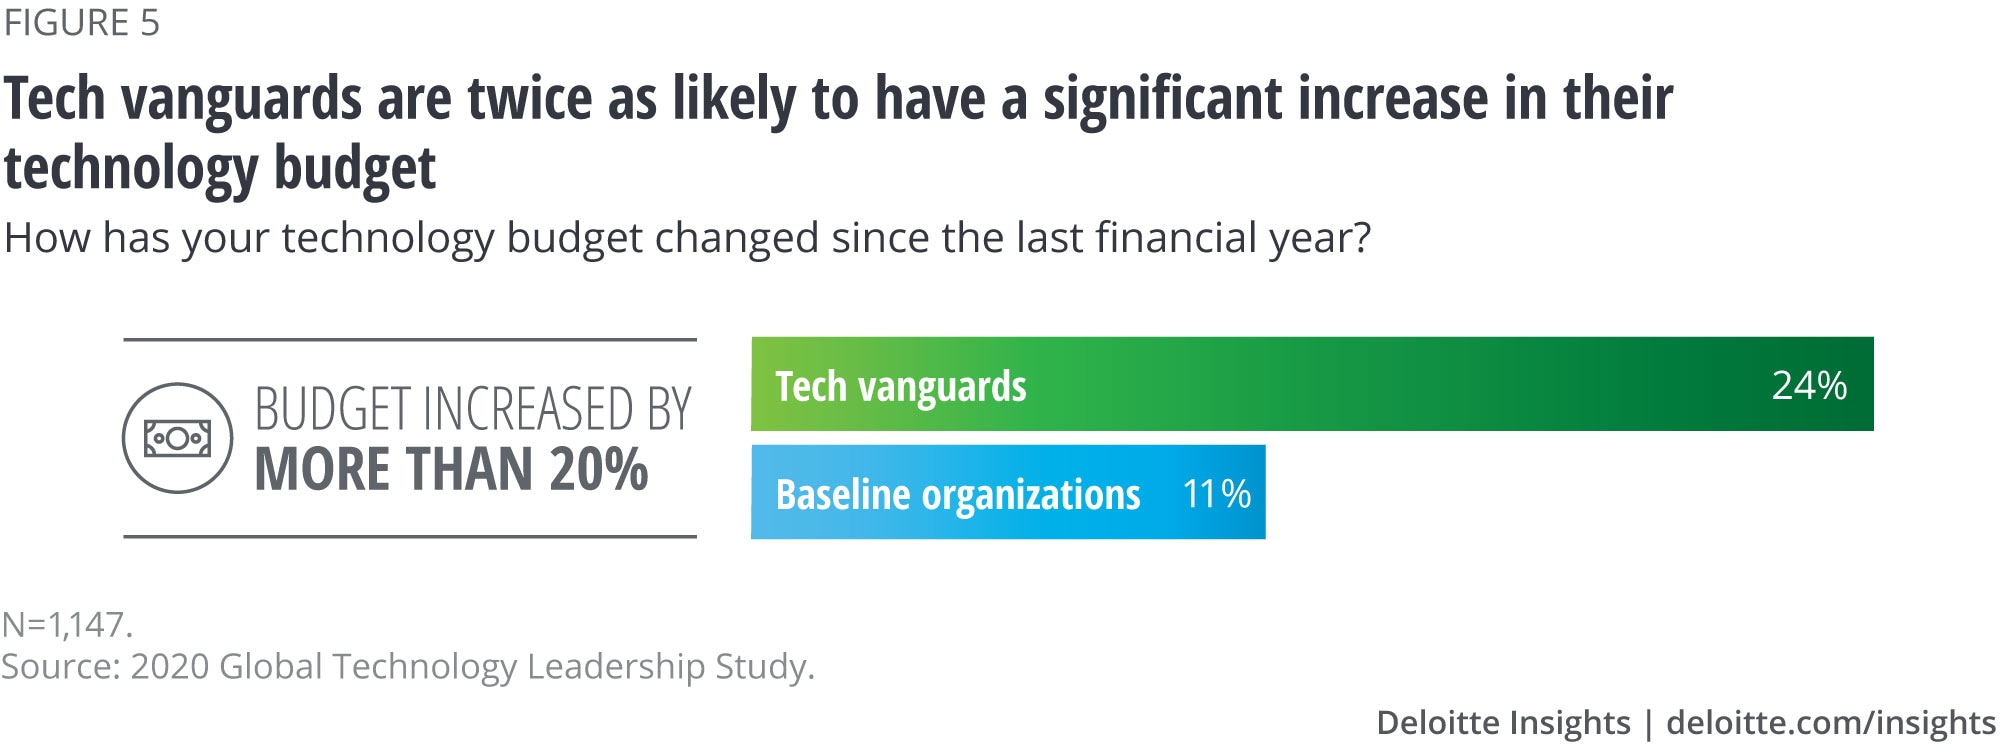 Tech vanguards are twice as likely to have a significant increase in their technology budget